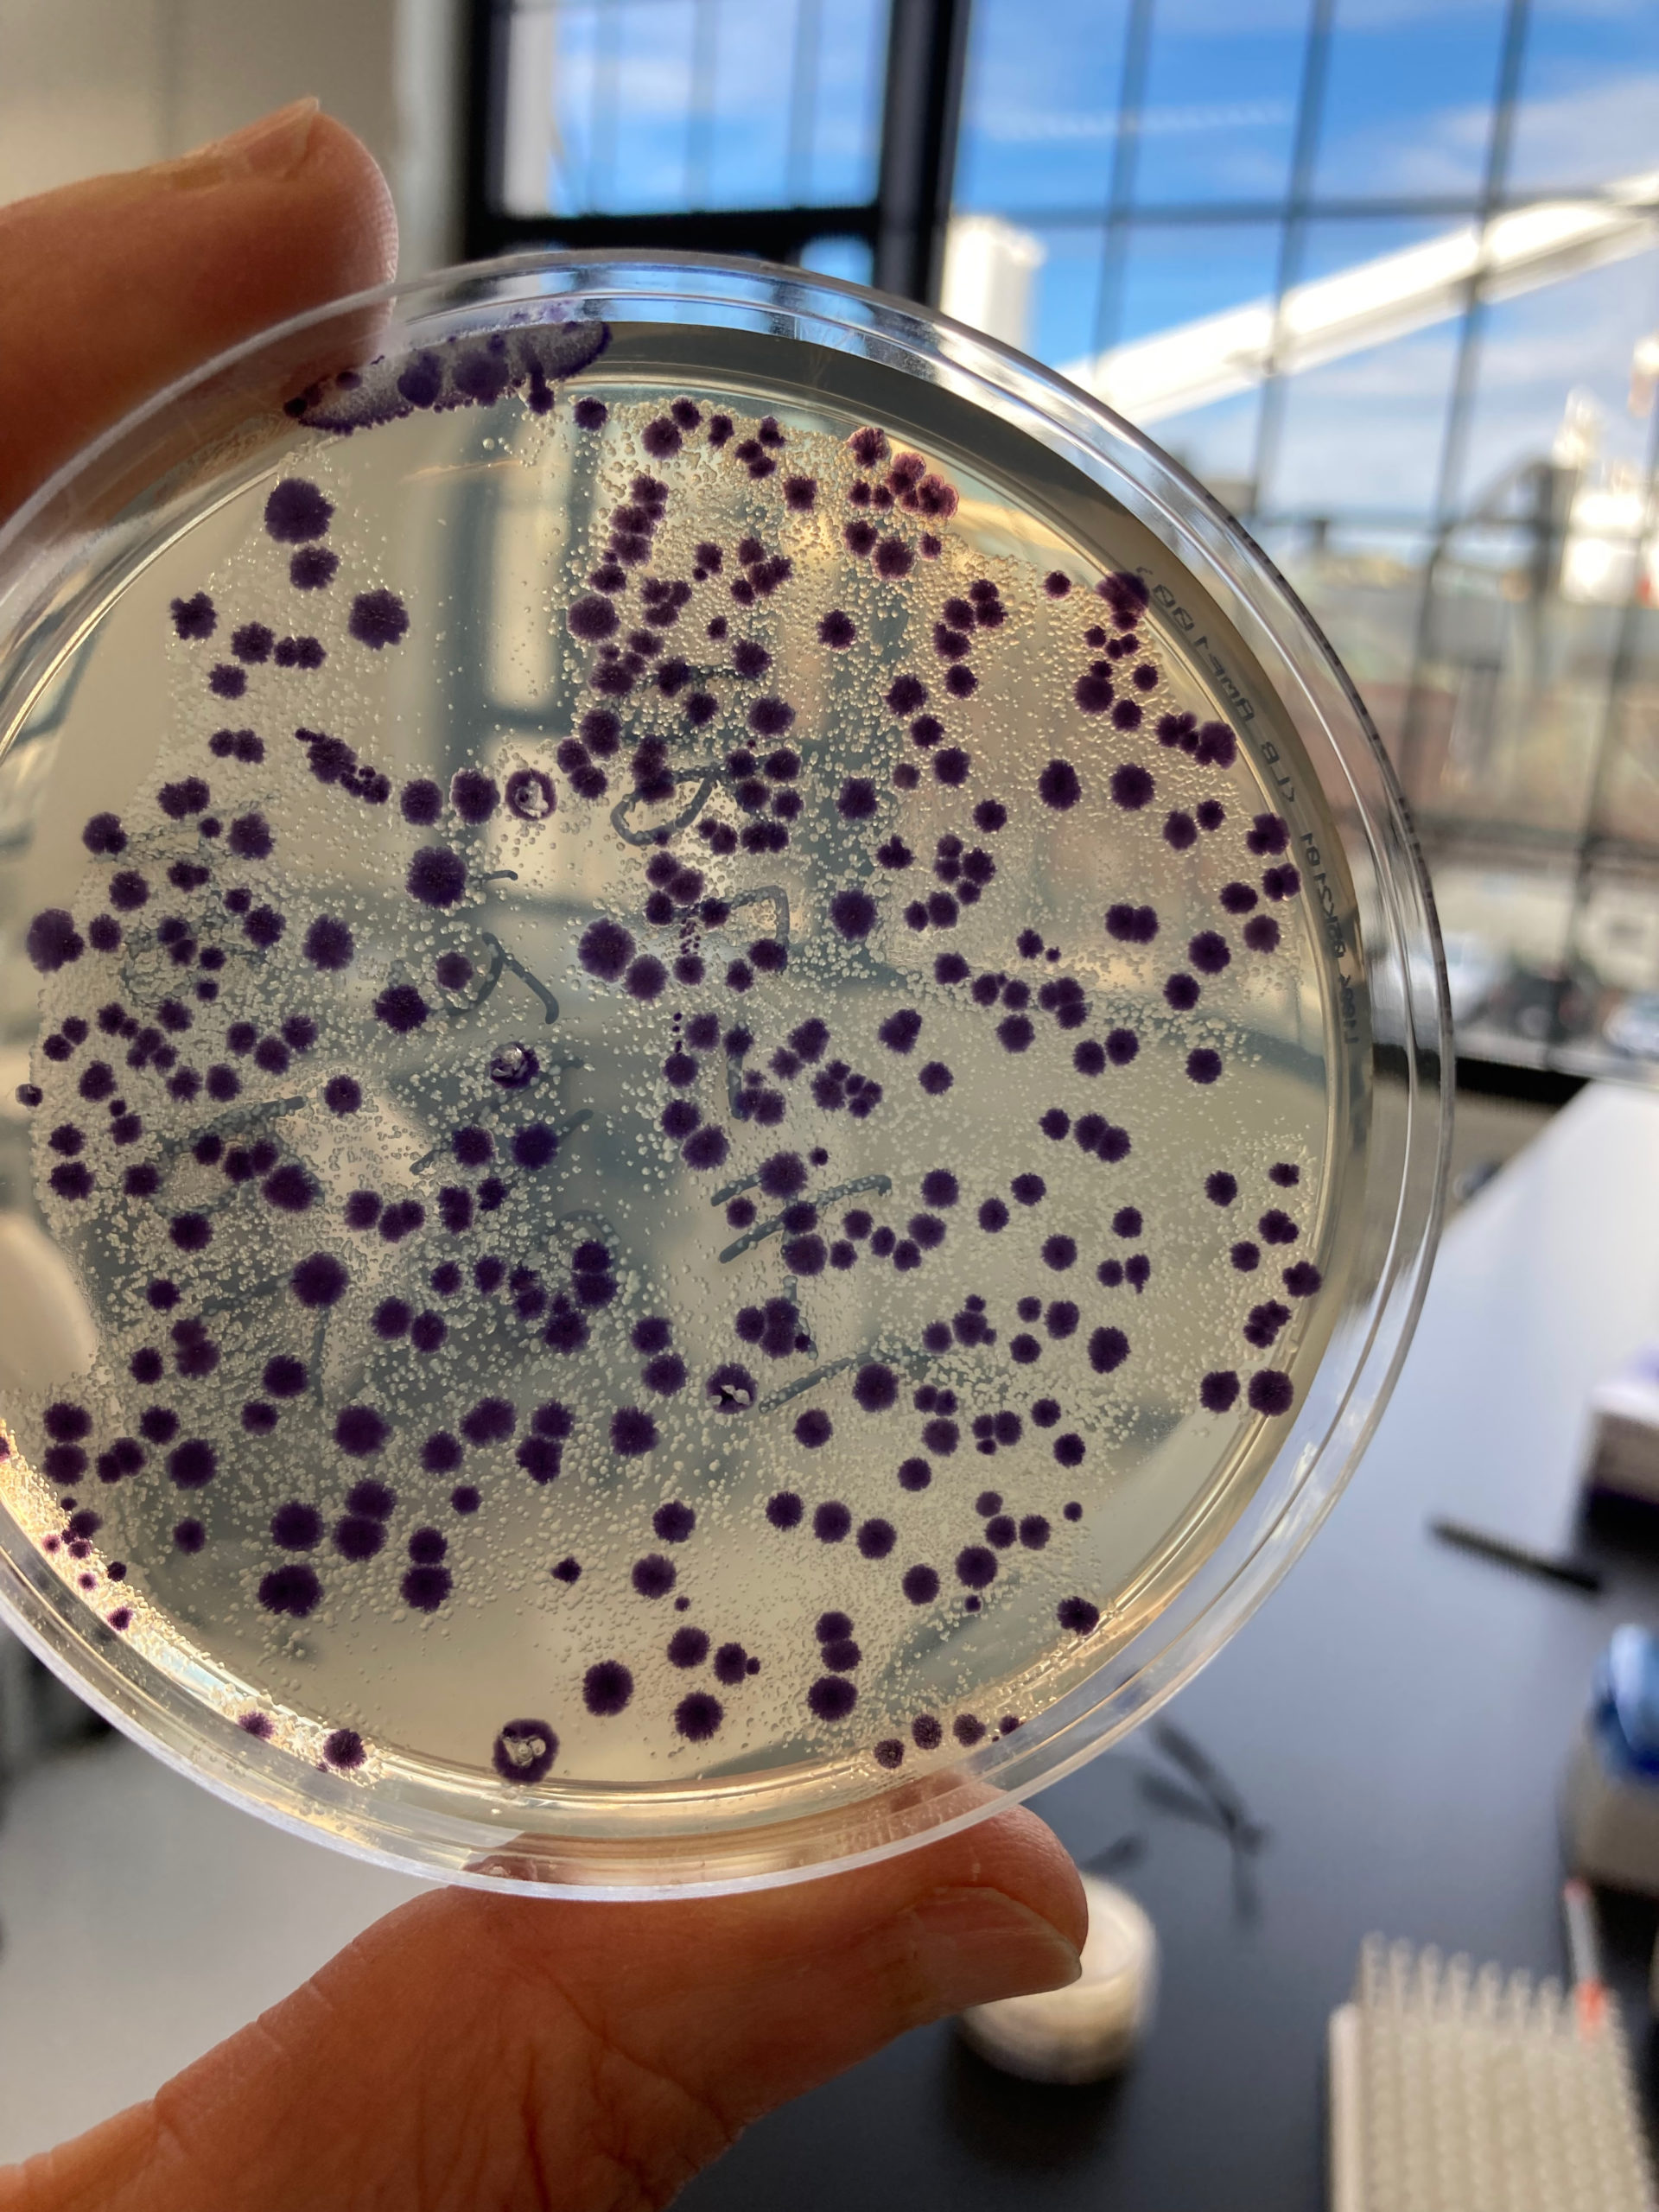 Colonies of bacteria that we engineered to make a purple pigment